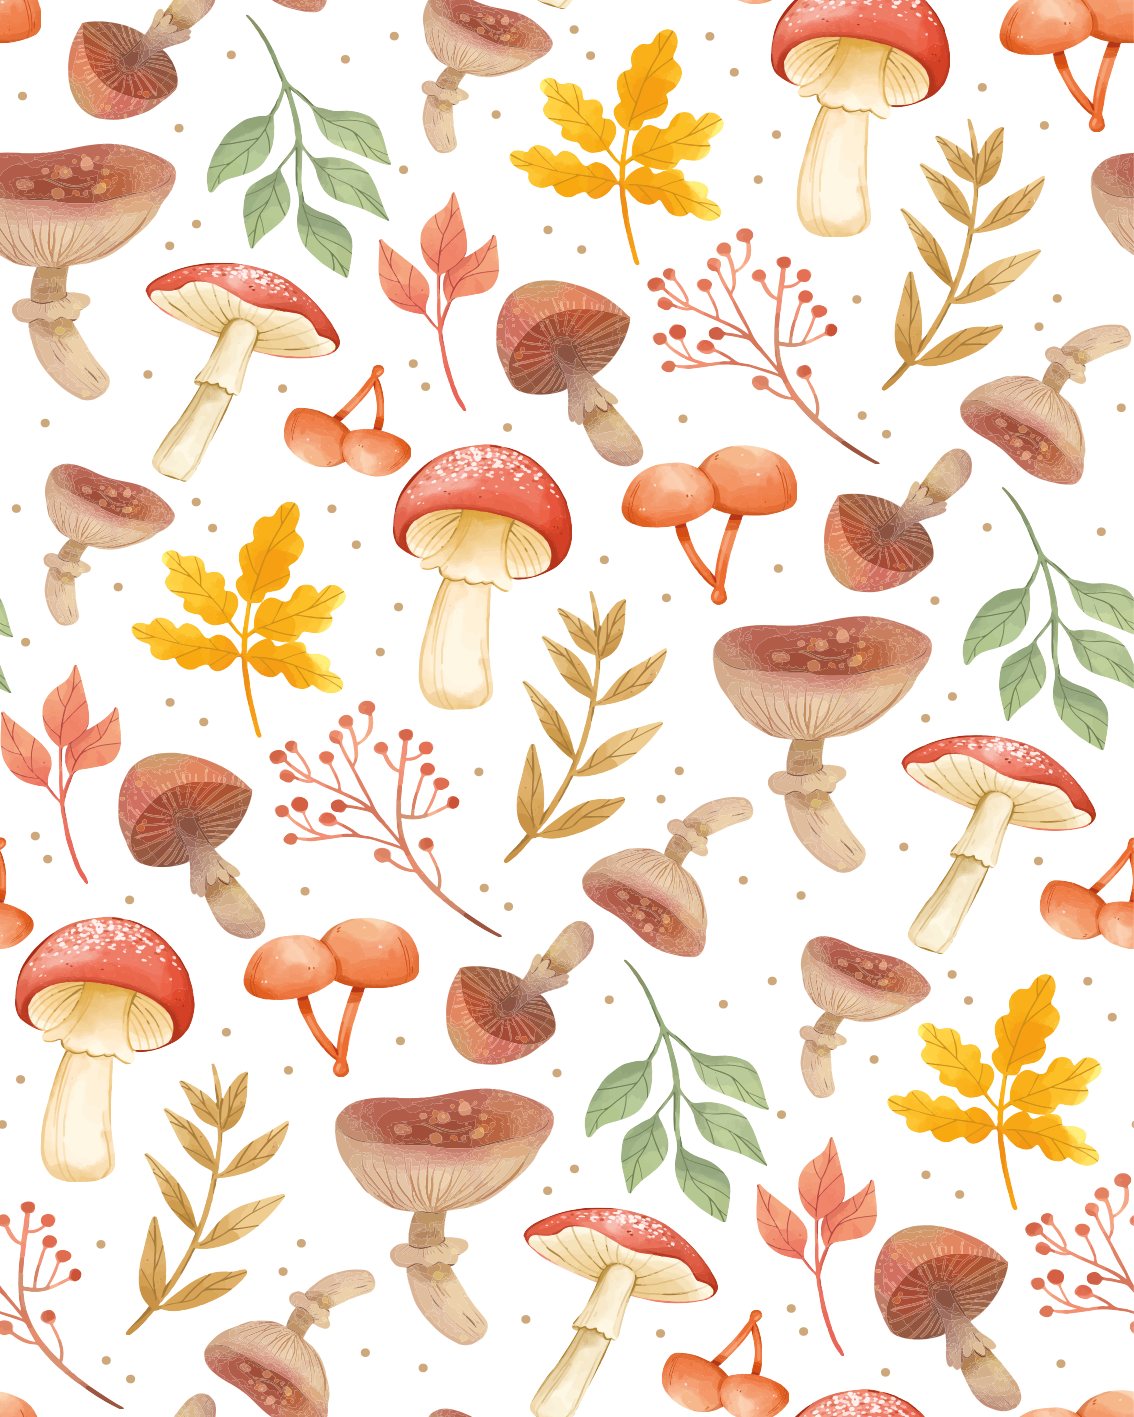 Free Forests Wild Mushrooms Background Images Virgin Forest Wild Mushrooms  Background Photo Background PNG and Vectors  Stuffed mushrooms Mushroom  background Mushroom wallpaper